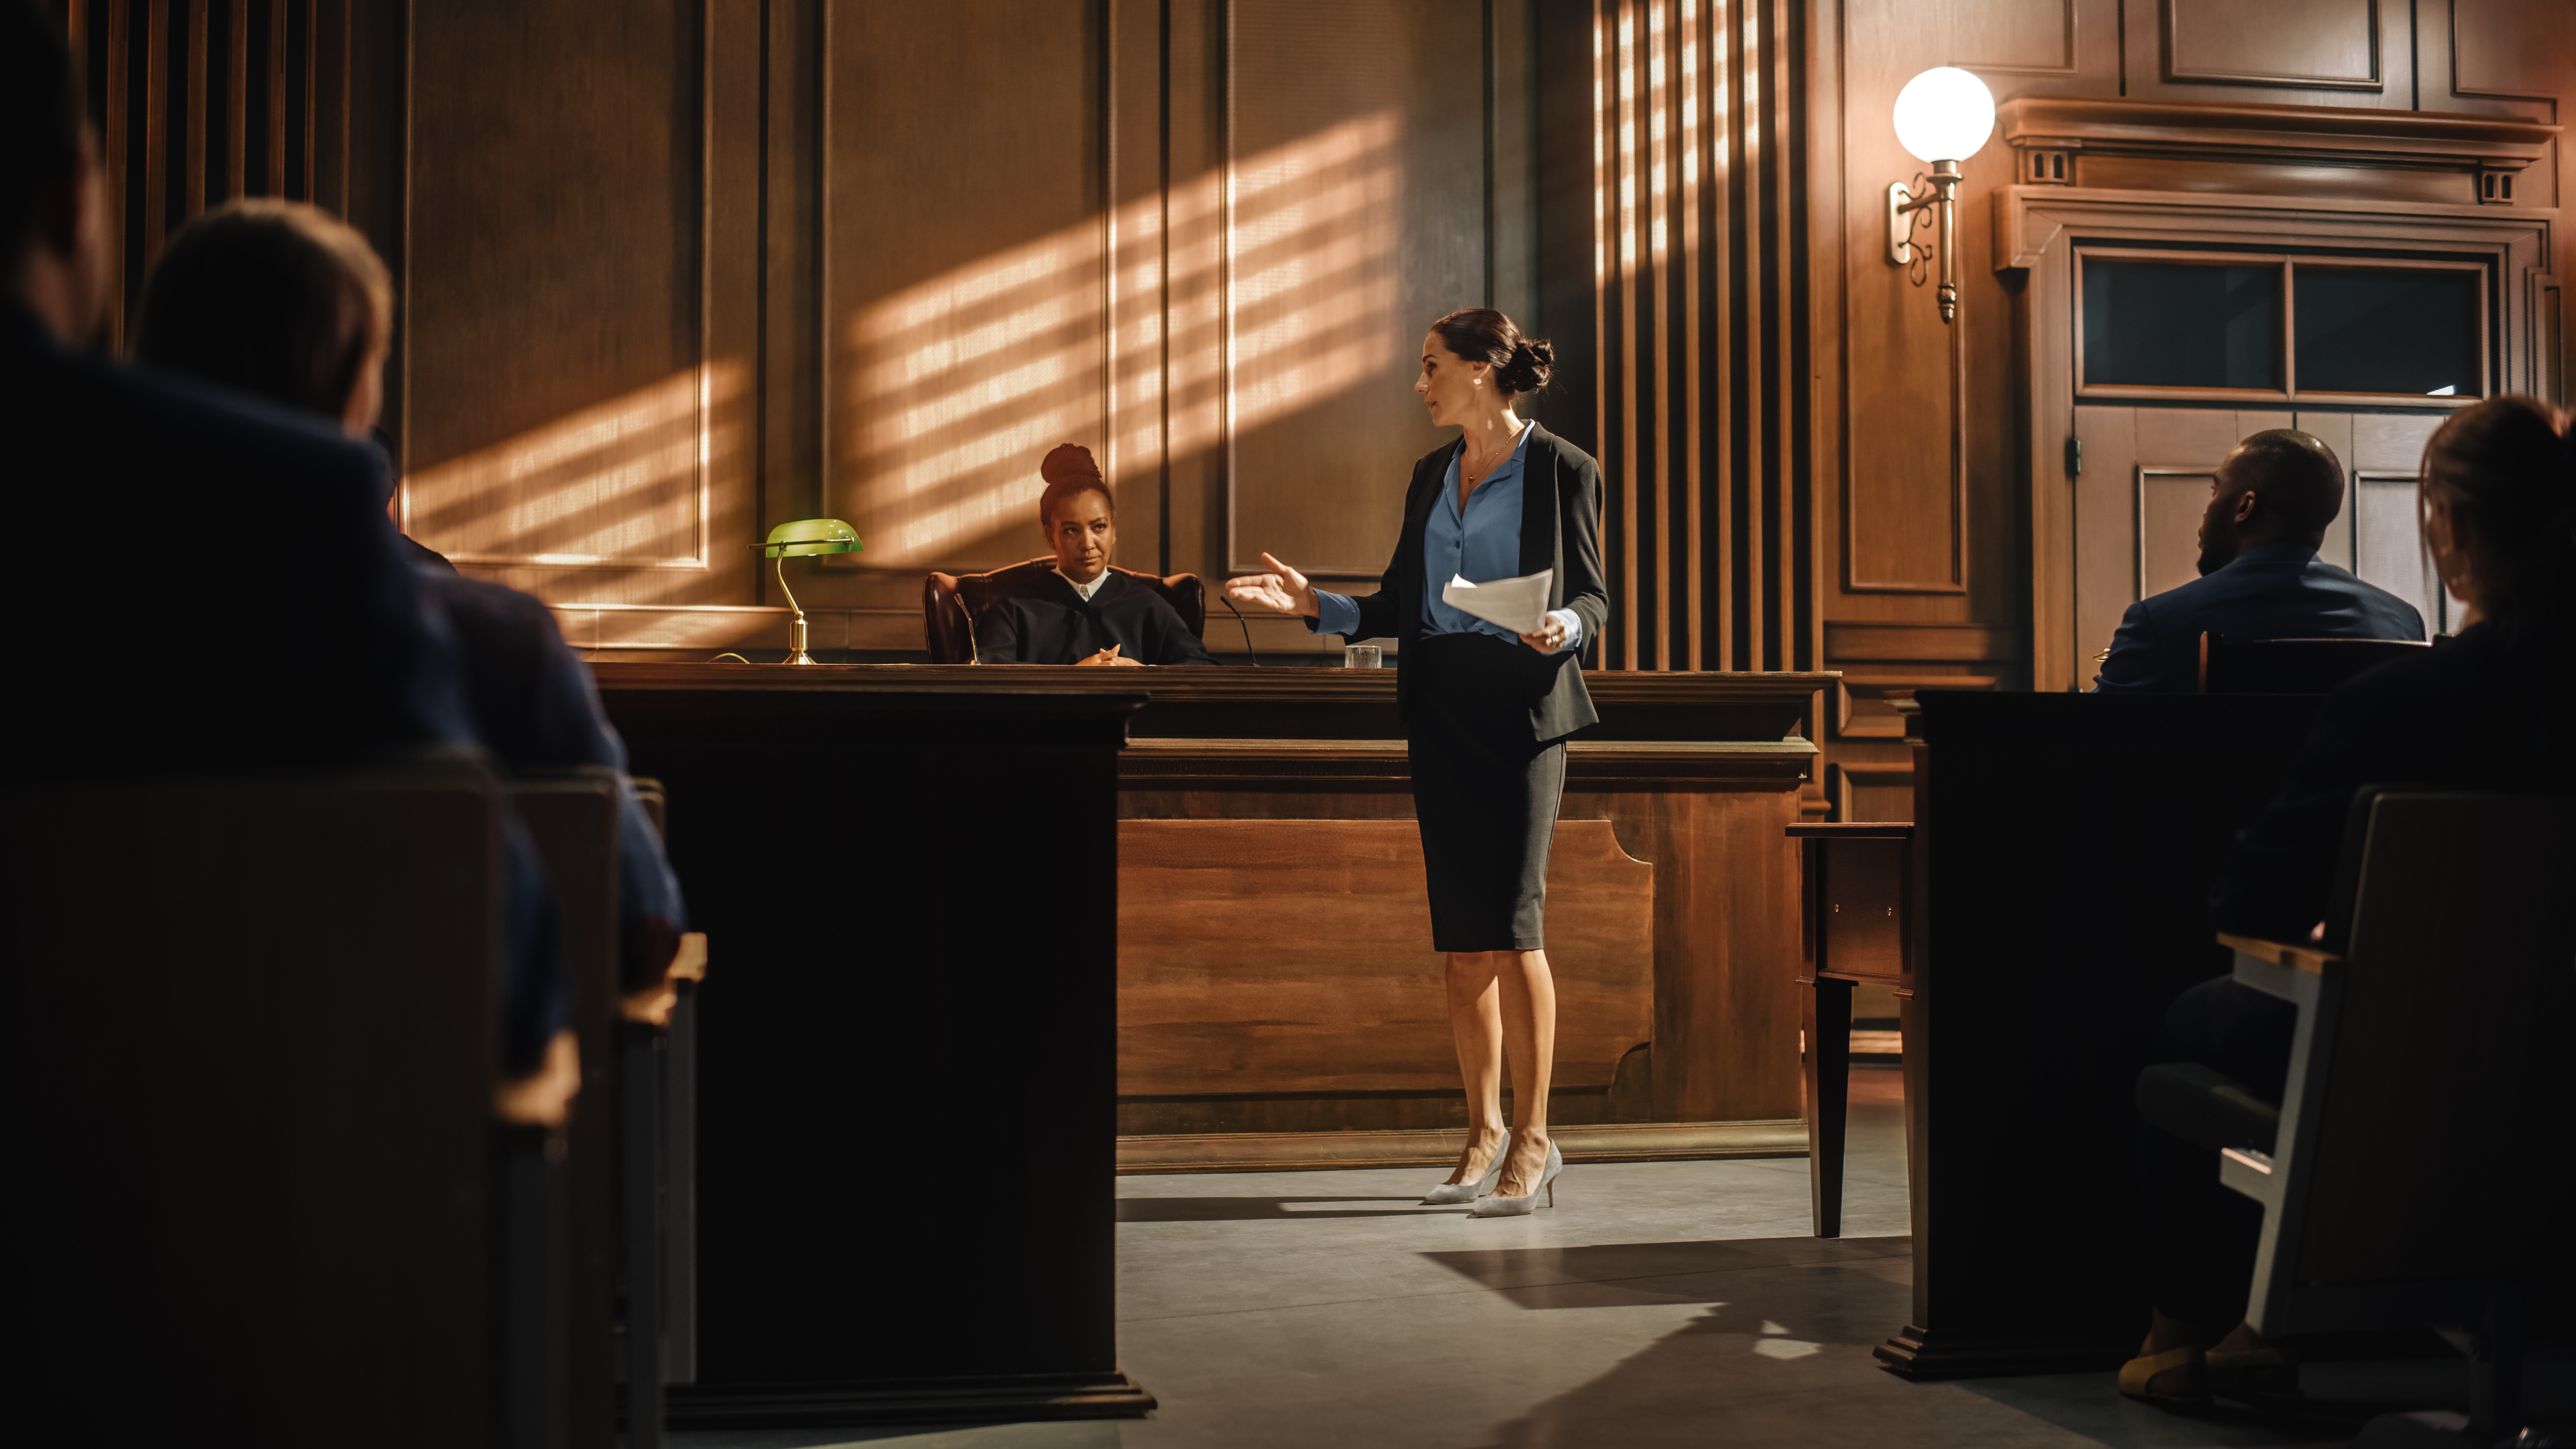 Courtroom | Source: Shutterstock